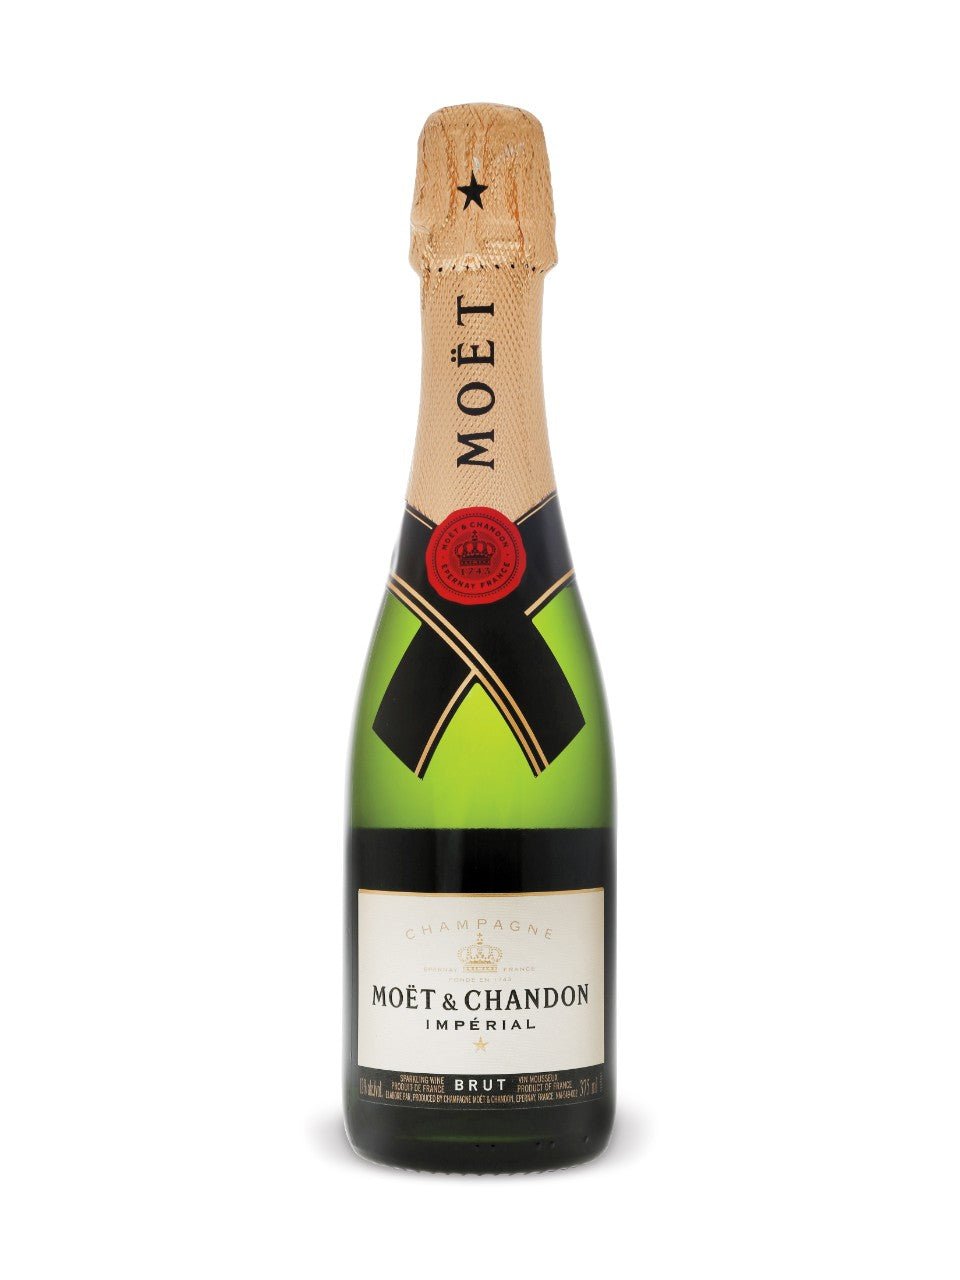 Moet & Chandon Imperial Champagne 375mL | Exquisite Wine & Alcohol Gift Delivery Toronto Canada | Vyno